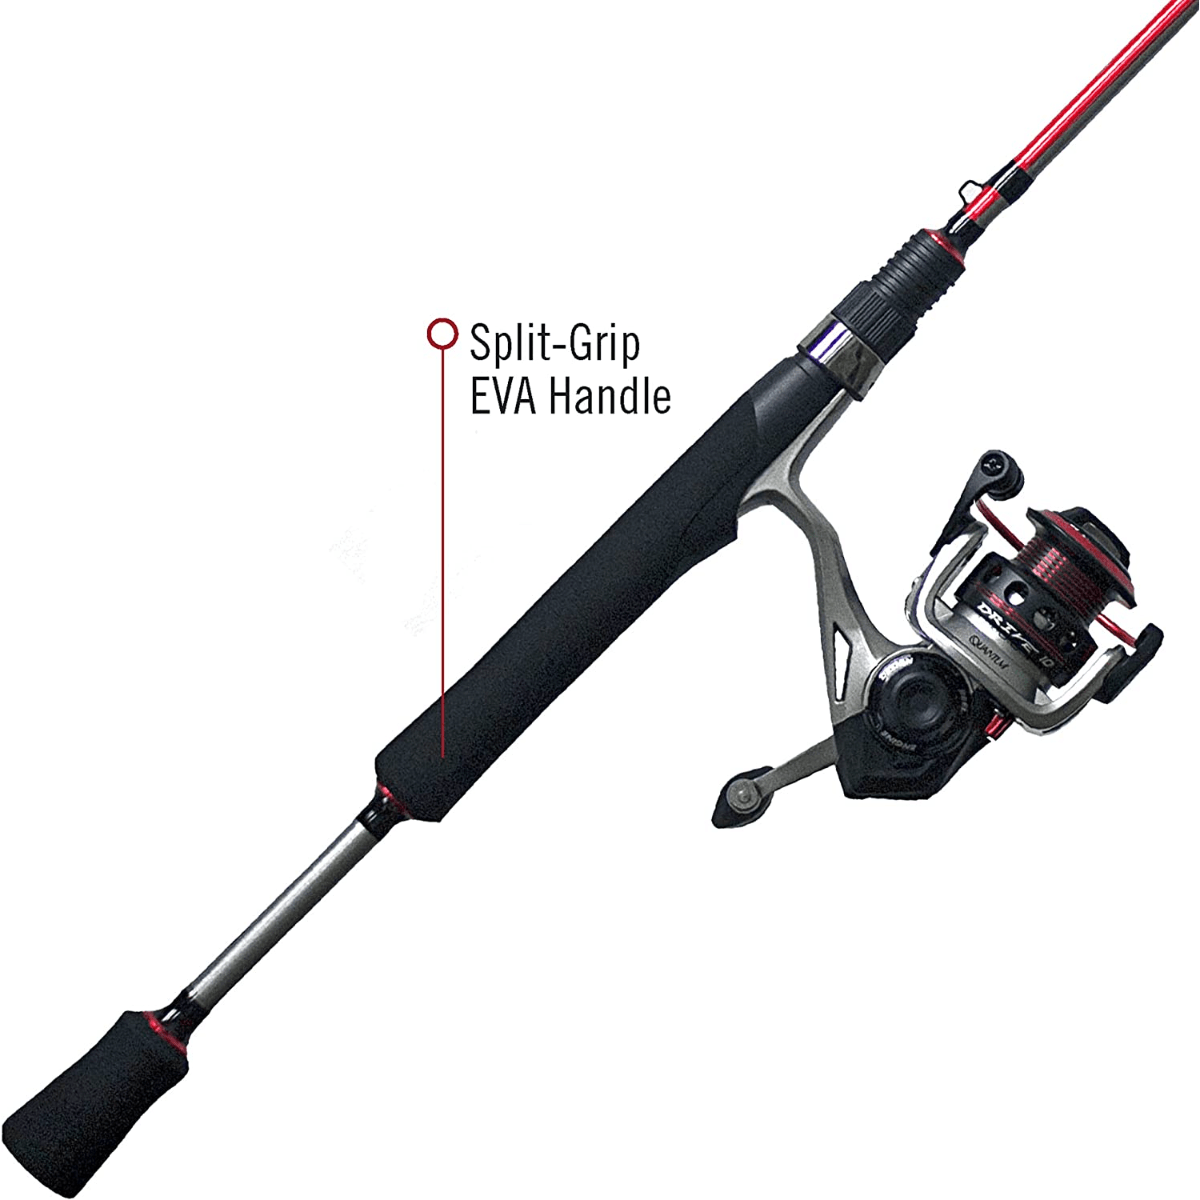 Abu Garcia Black Max Spinning Reel and Fishing Rod Combo, Size: 6'6 inch Large, 1 Piece